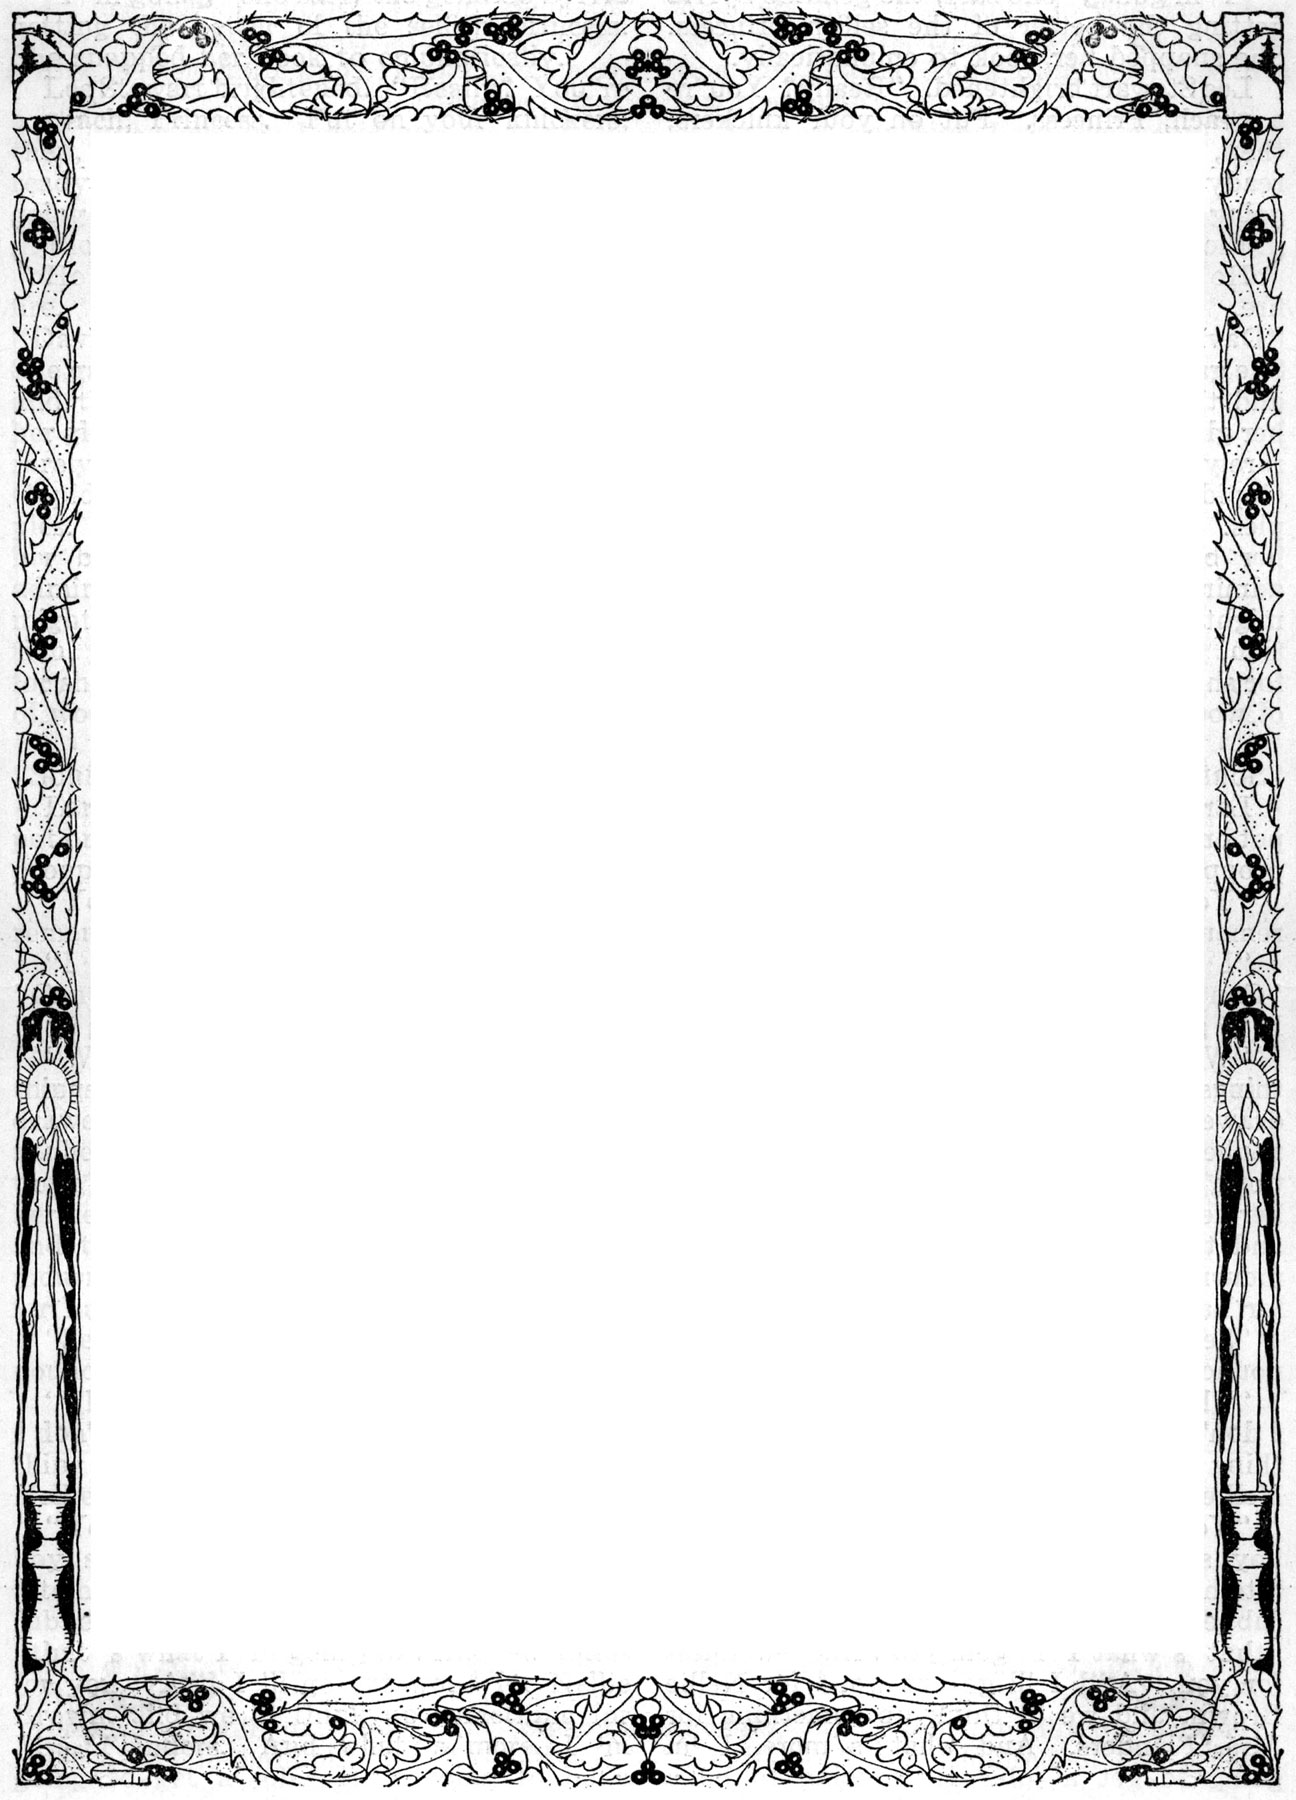 Decorative Page Borders Free - ClipArt Best